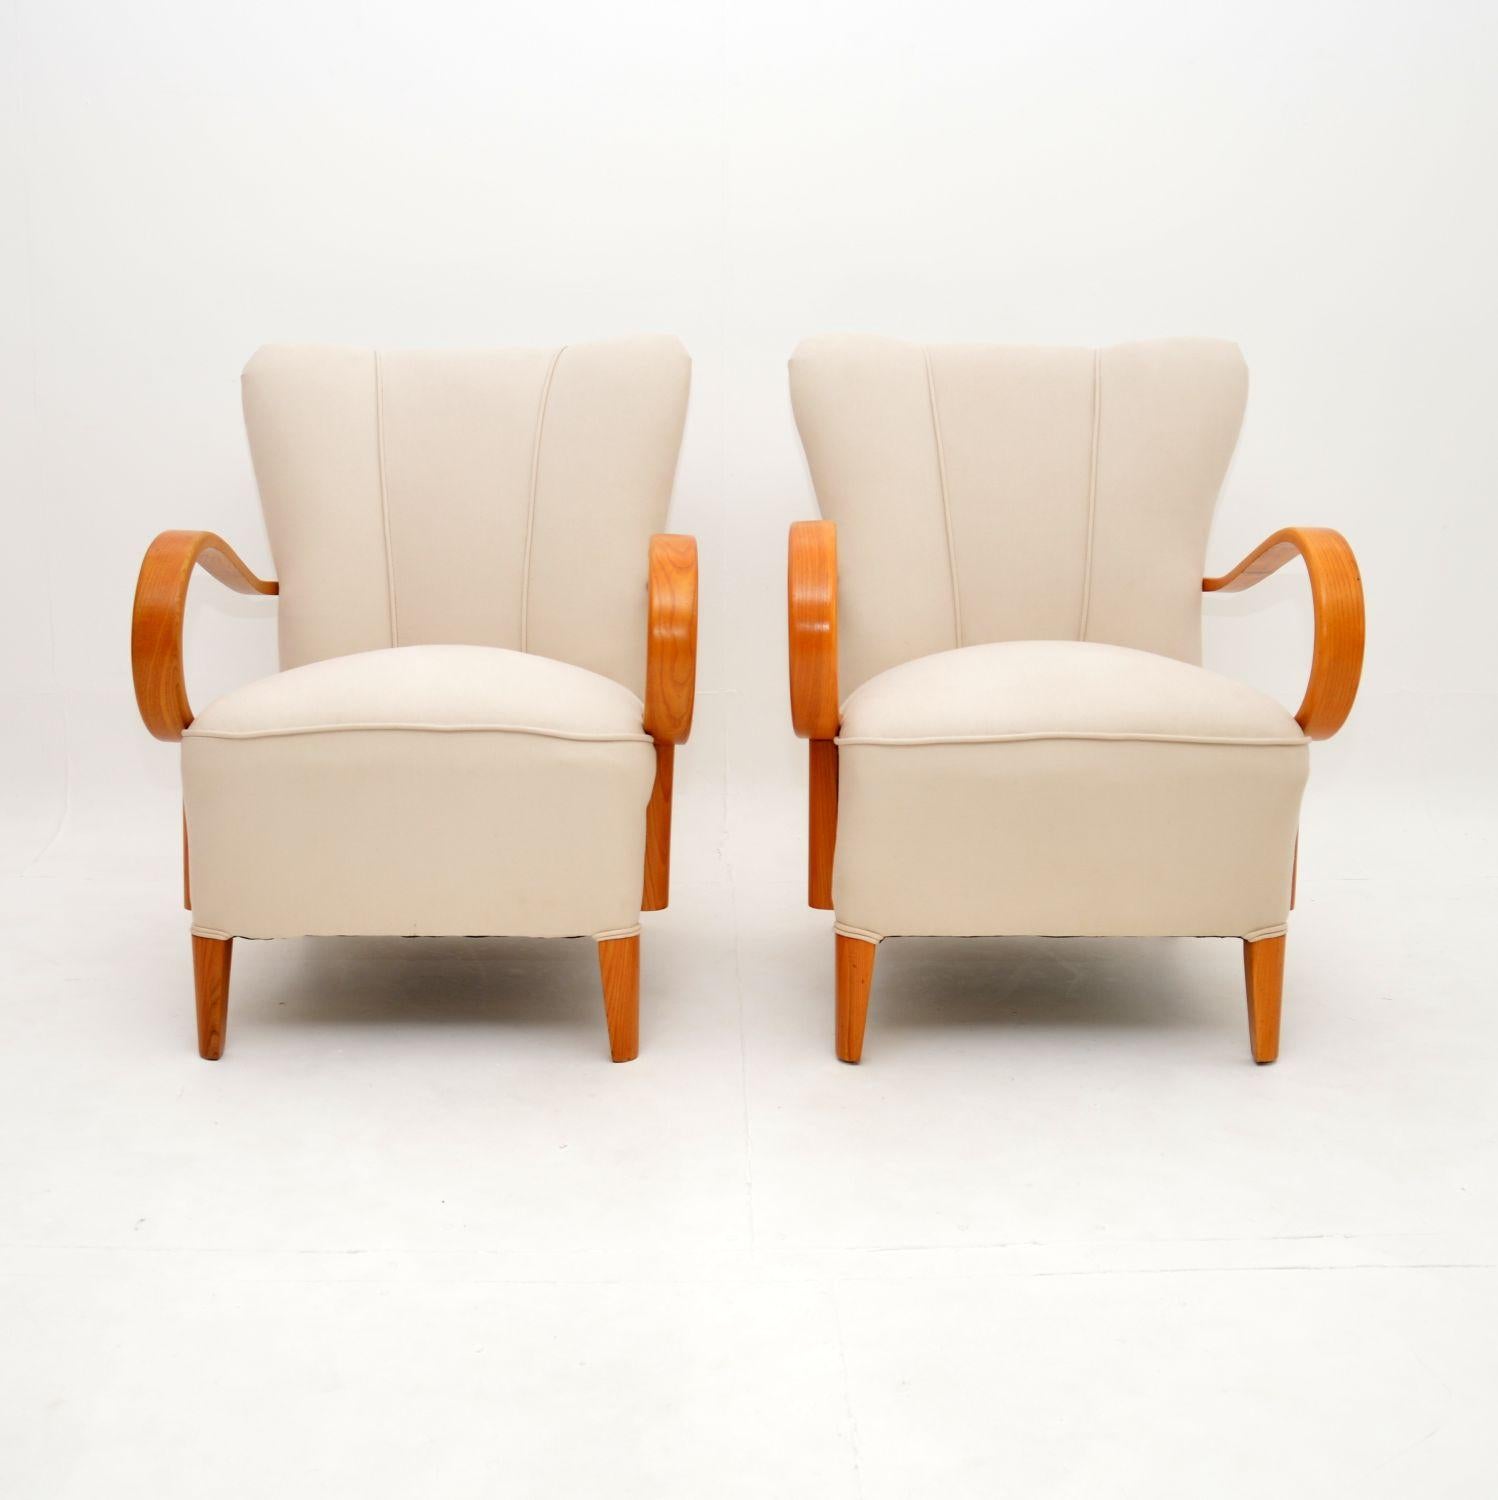 A stunning Swedish 1920’s pair of Art Deco armchairs with stylish and shapely elm frames. They were recently imported from Sweden, they date from the 1920-30’s.

They are of excellent quality and beautifully designed. The frames have scalloped